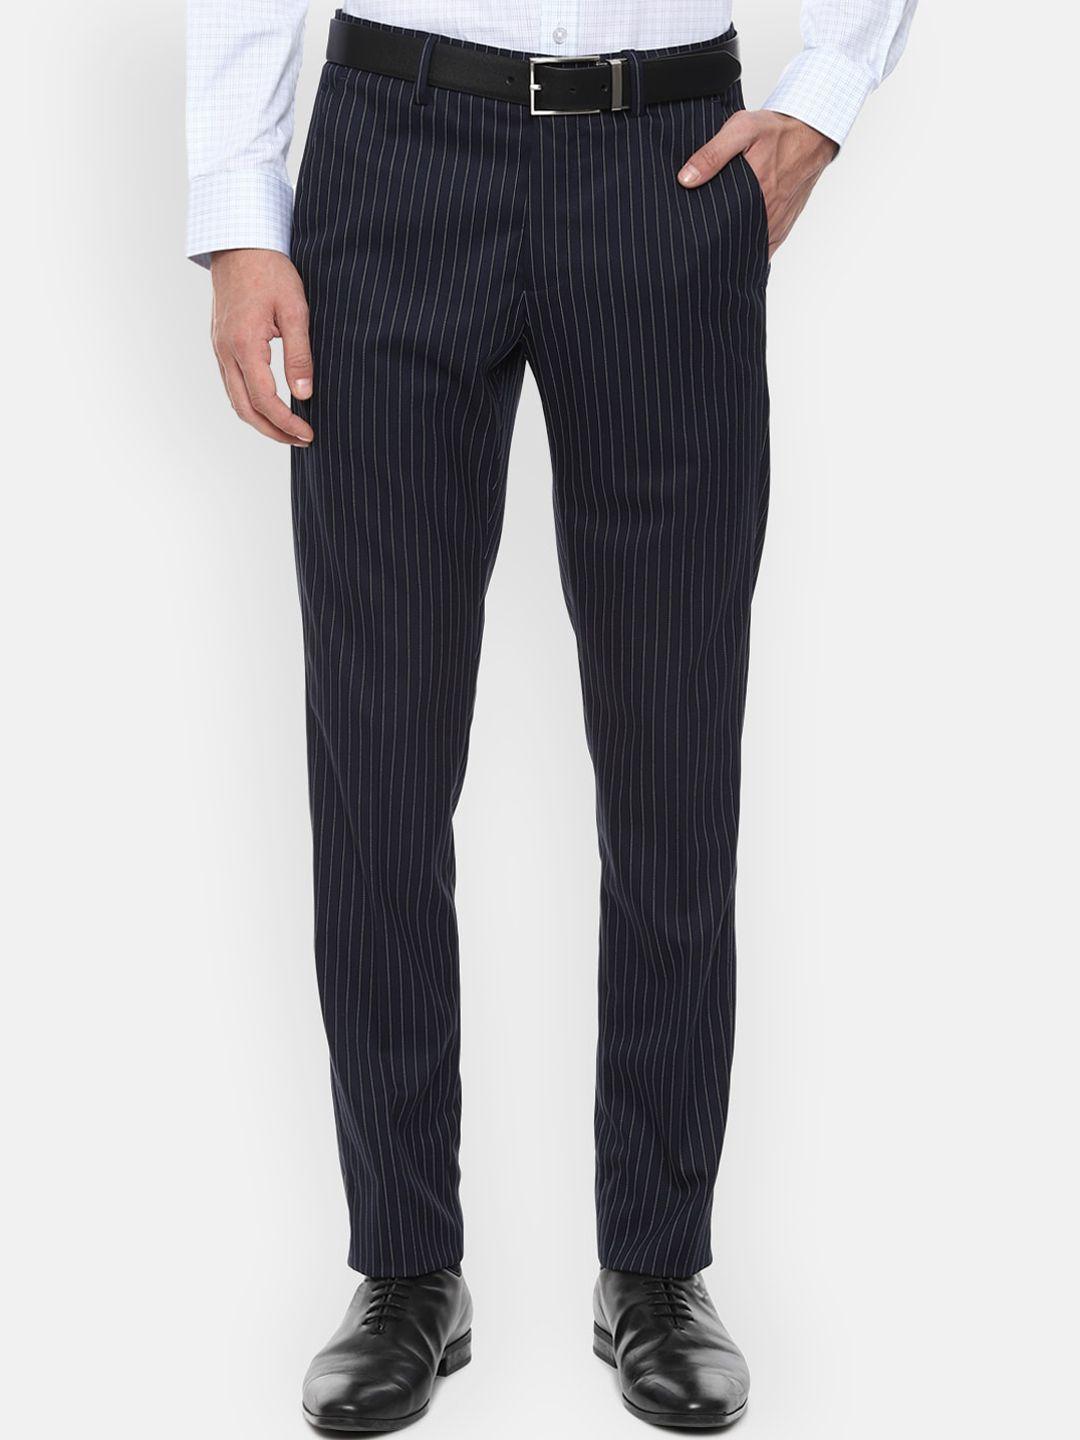 louis-philippe-men-navy-blue-striped-slim-fit-formal-trousers